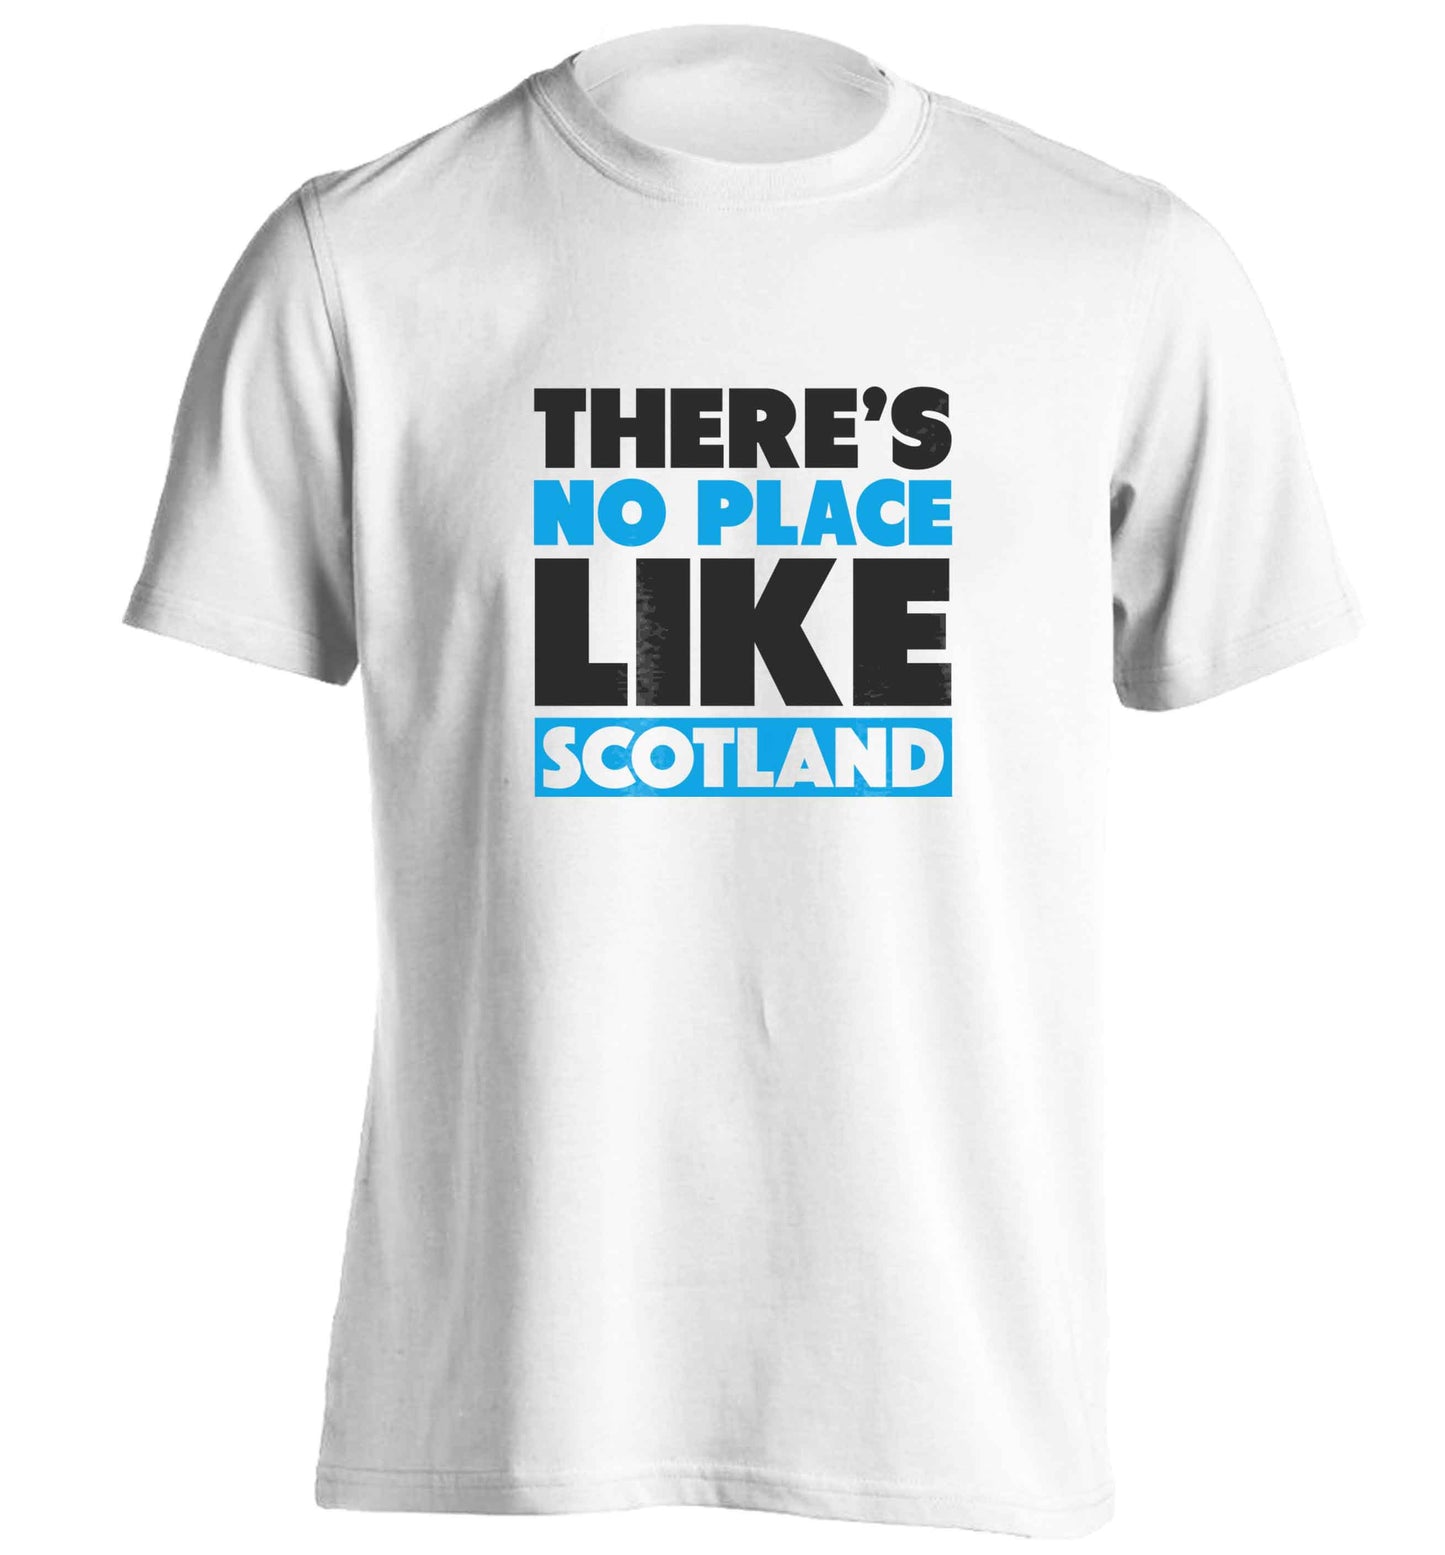 There's no place like Scotland adults unisex white Tshirt 2XL